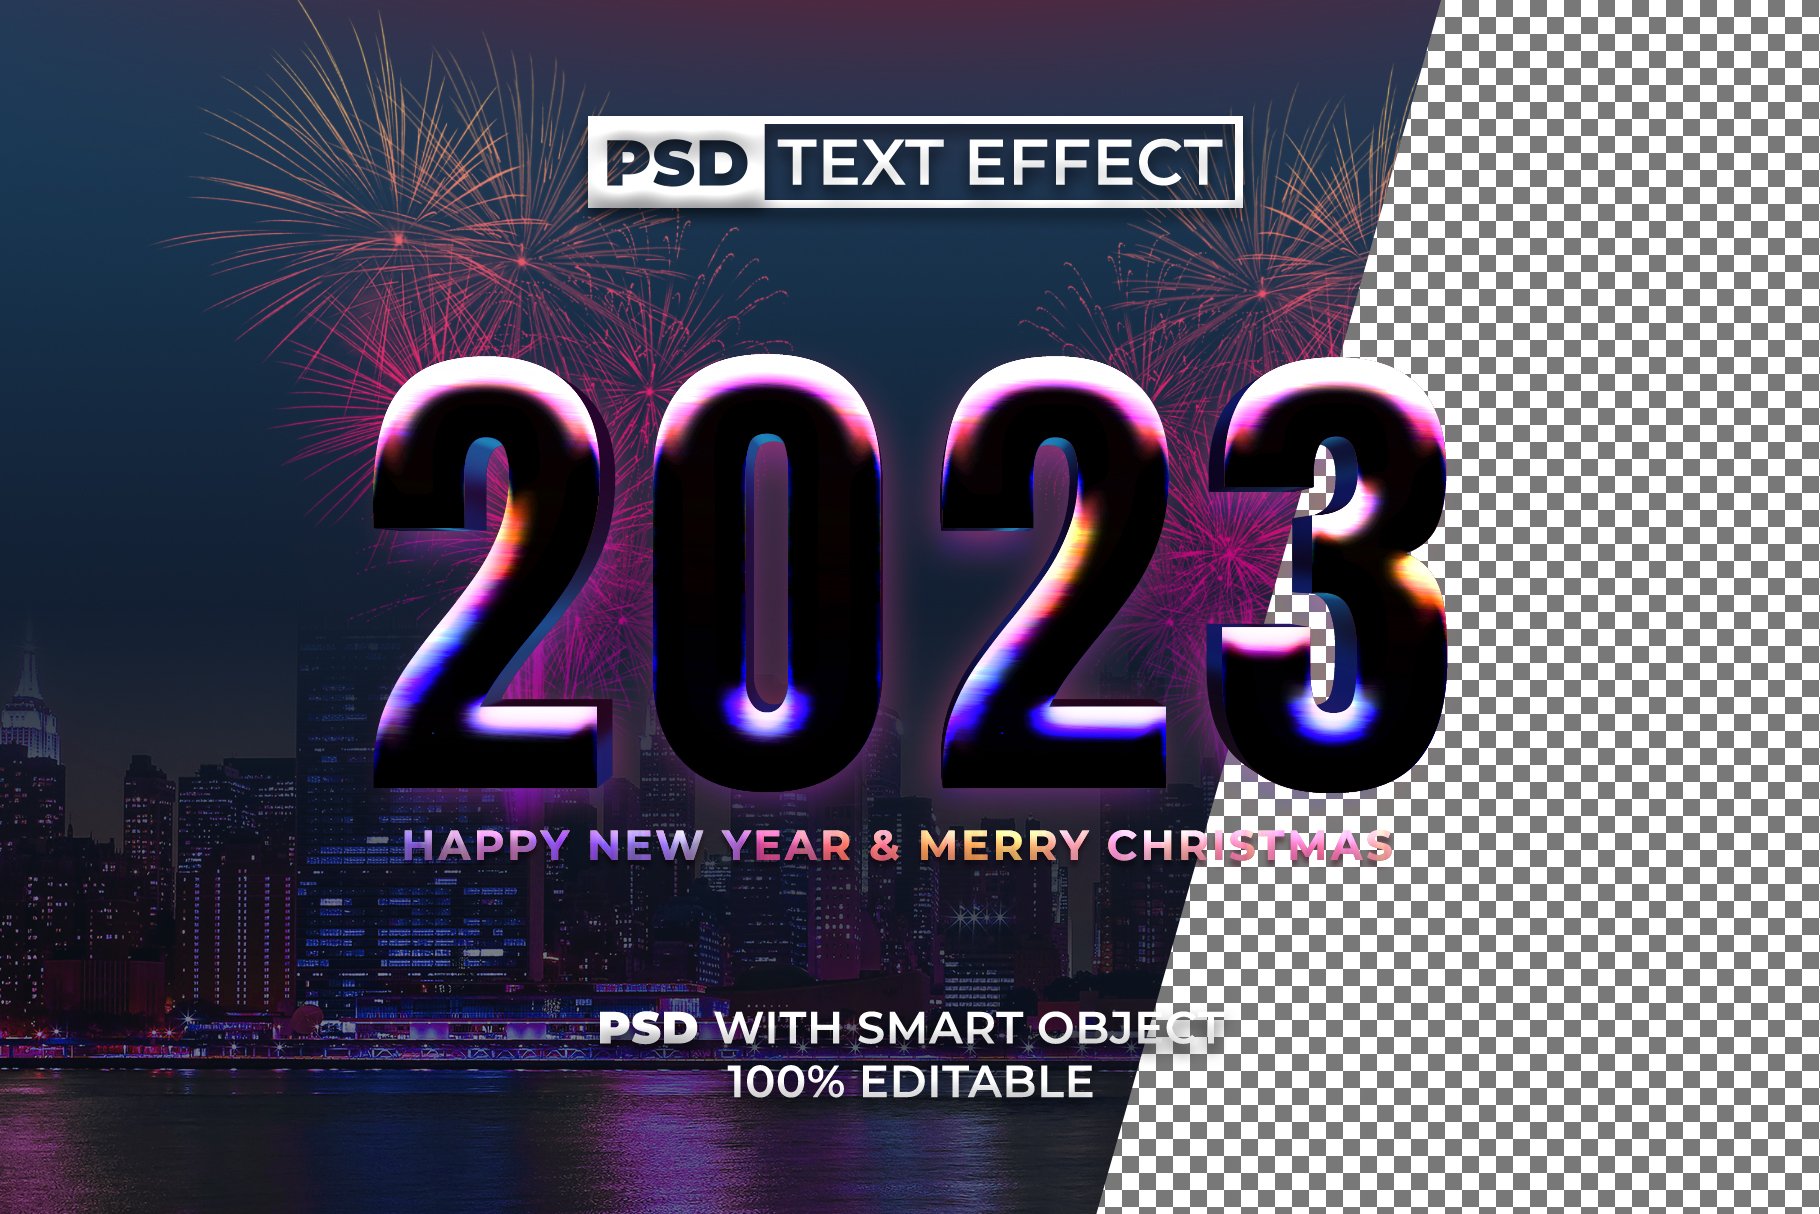 Colorful text effect new year stylepreview image.